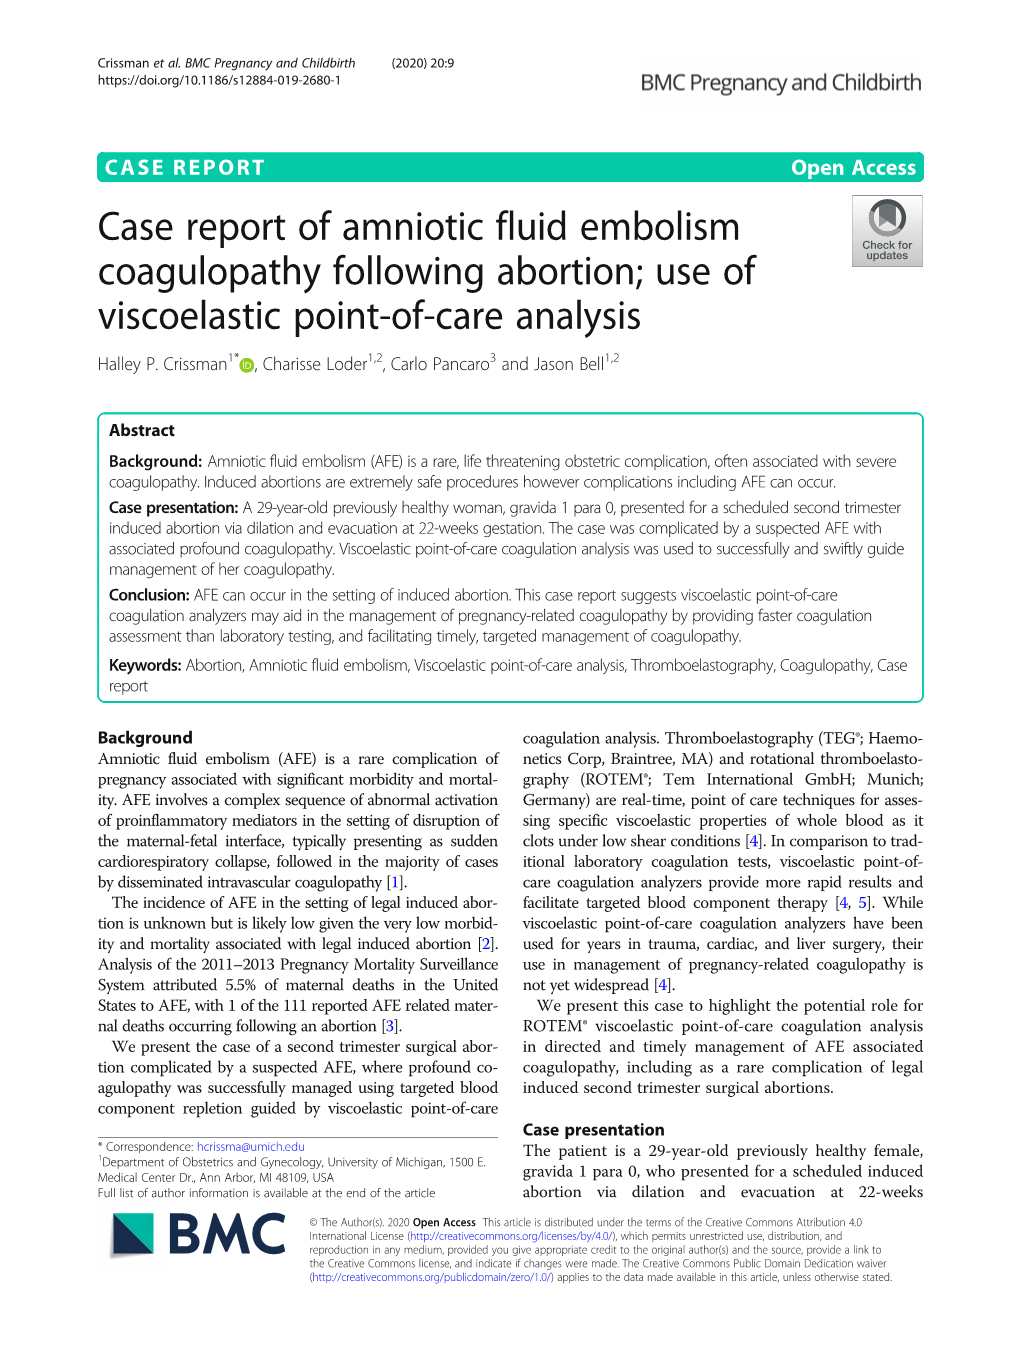 Case Report of Amniotic Fluid Embolism Coagulopathy Following Abortion; Use of Viscoelastic Point-Of-Care Analysis Halley P